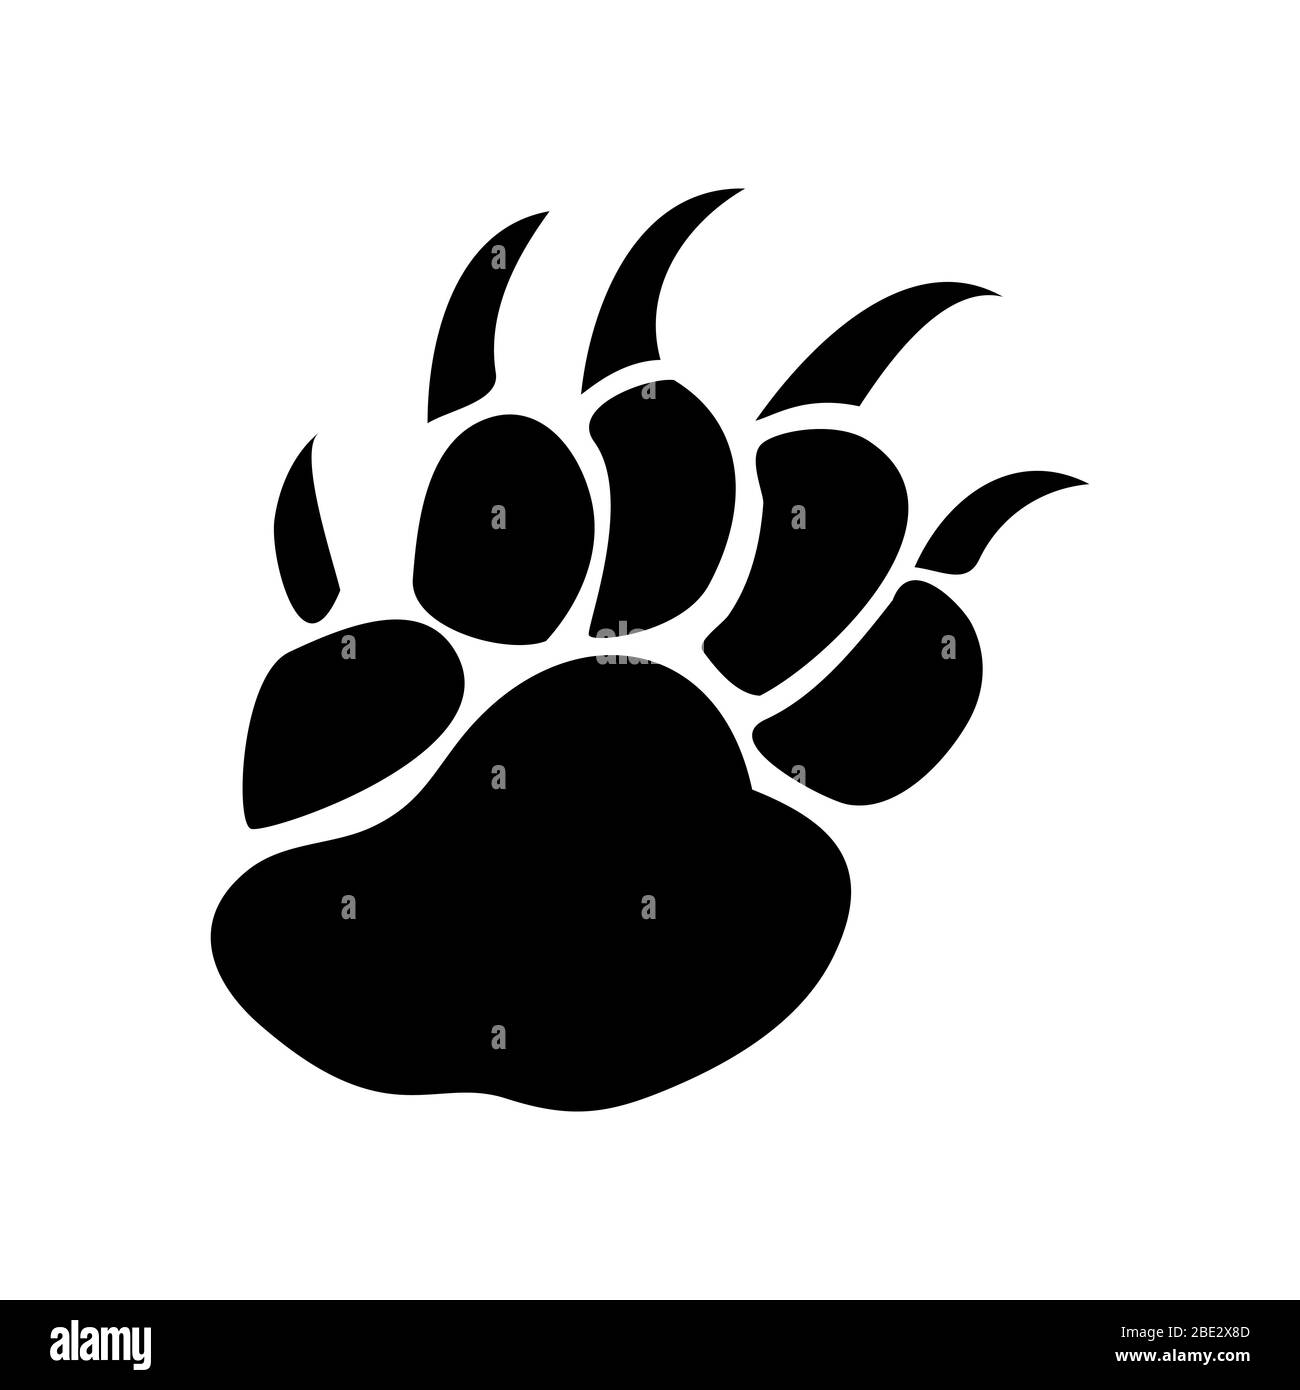 Pawn silhouette, black minimalist flat vector illustration icon, symbol for animal and wildlife Stock Vector